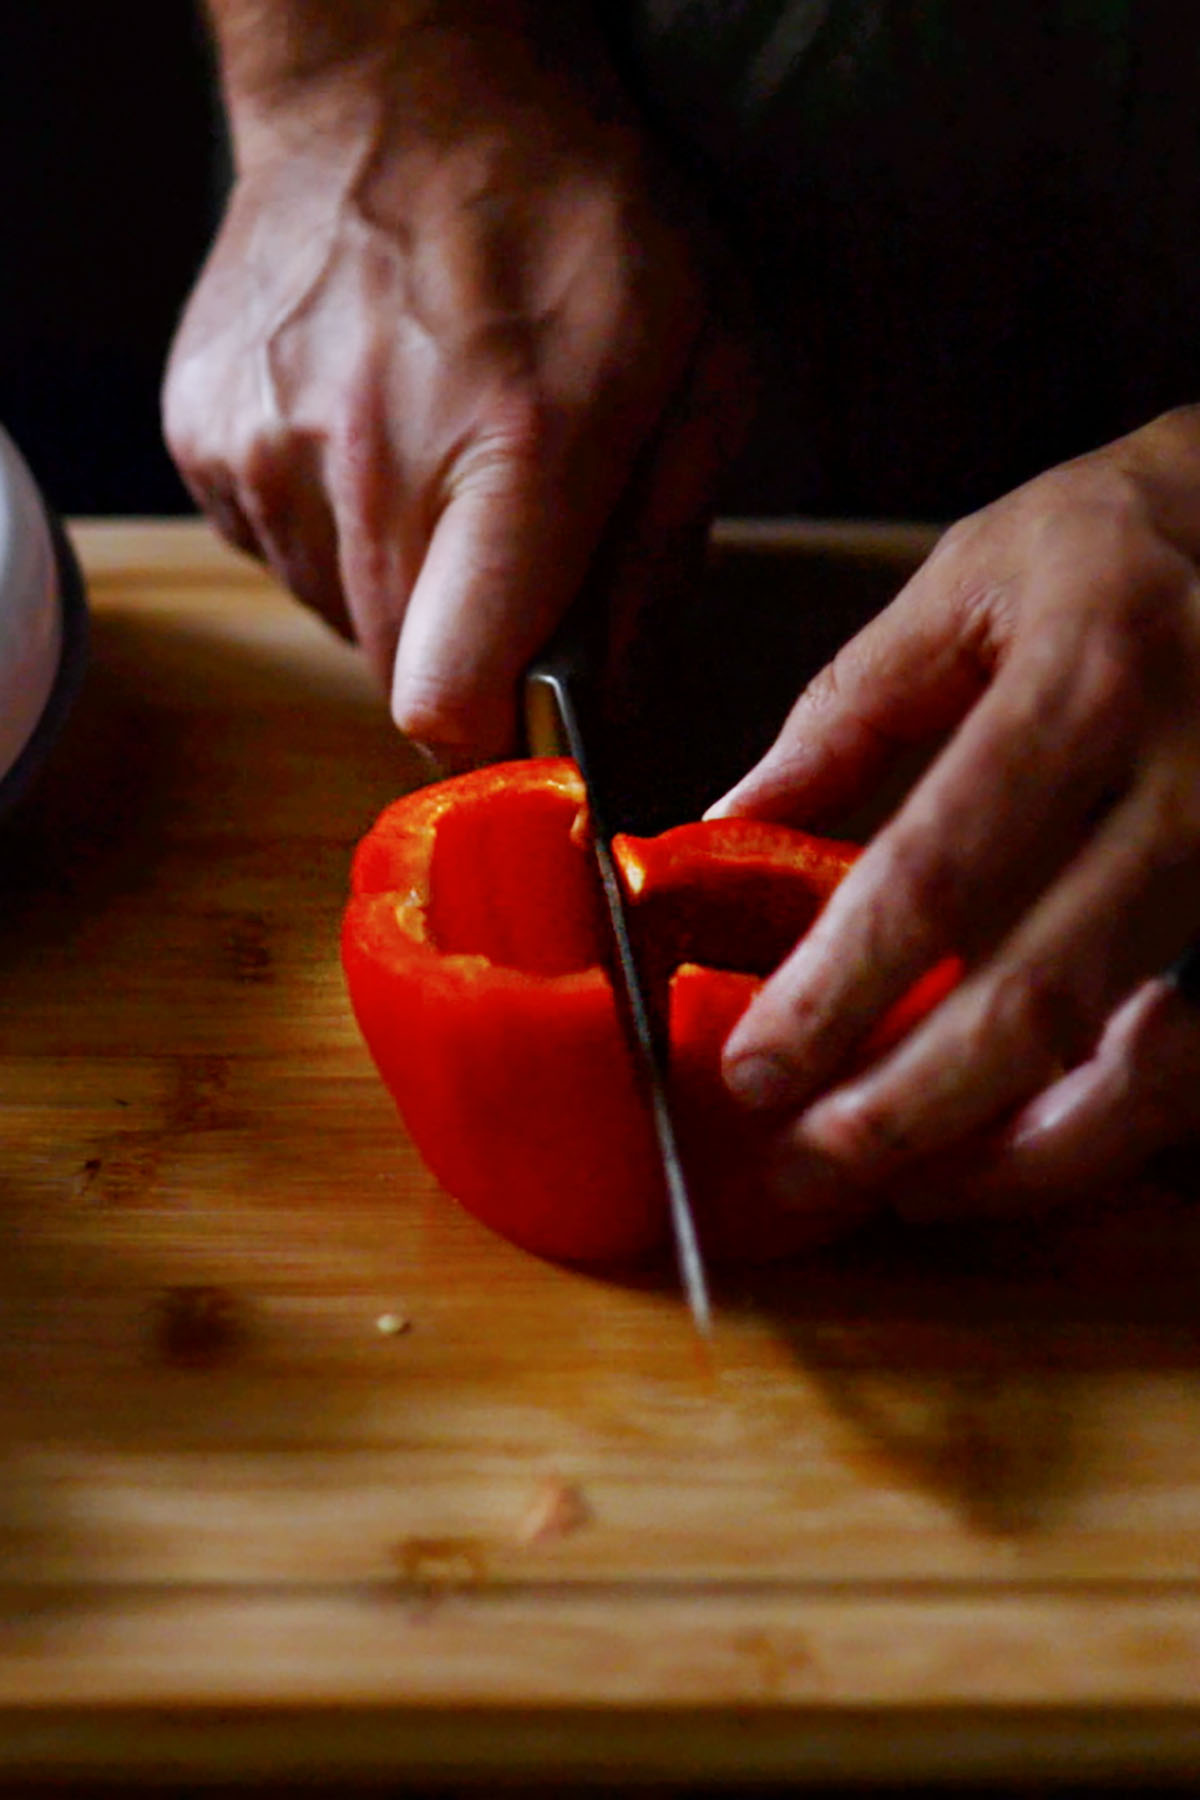 Red bell pepper being sliced in half on a wood cutting board.